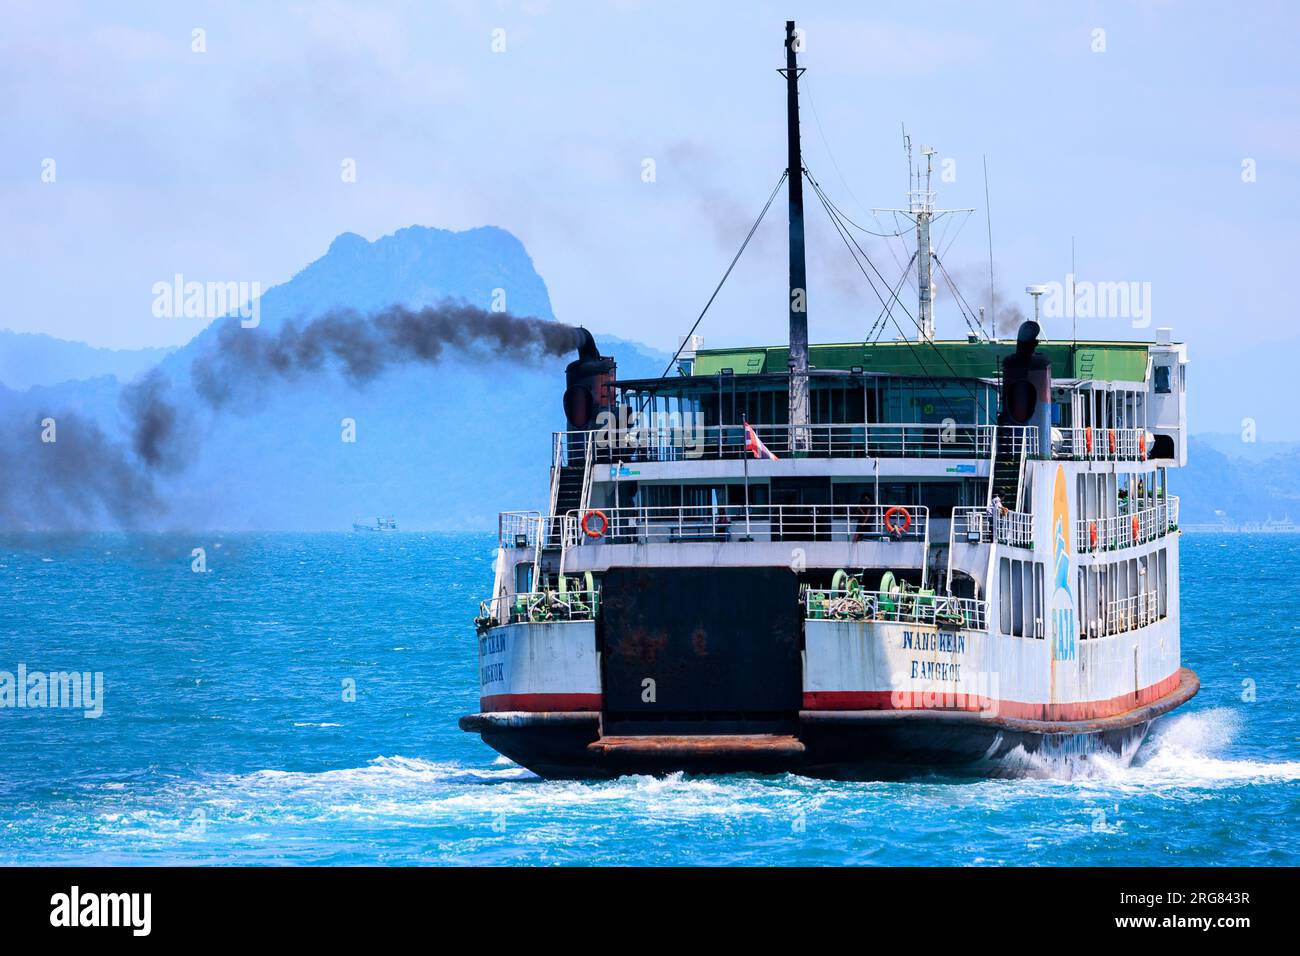 Ferry boat exhausting dark polluted smoke, Thailand Stock Photo